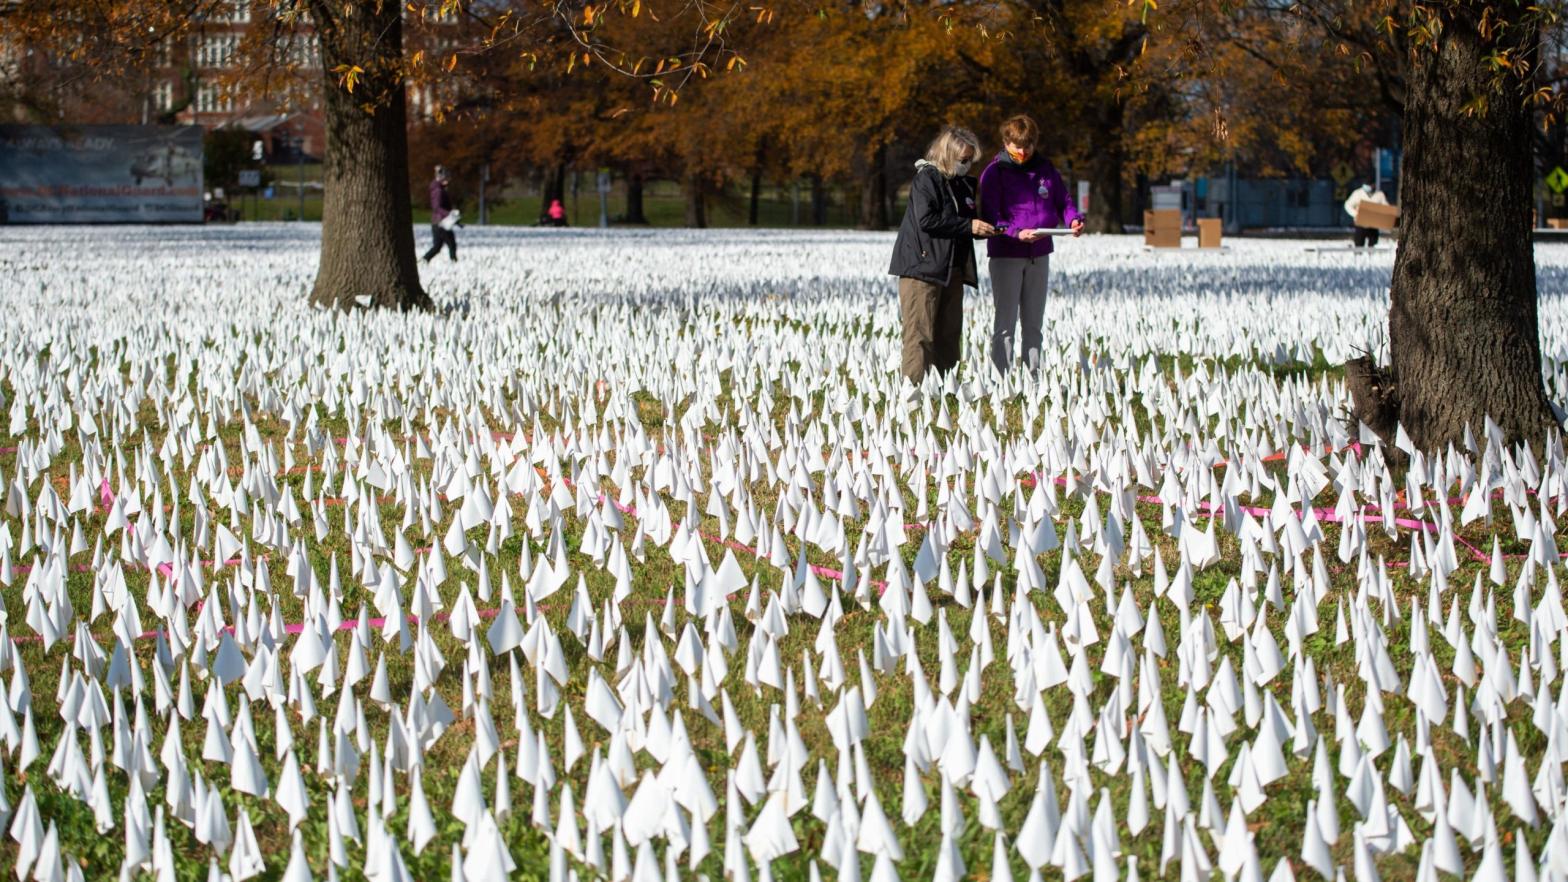 Volunteers working on an outdoor public art installation in Washington DC. created by Suzanne Firstenberg, December 2020. The white flags are meant to represent each life lost to covid-19 in the U.S.